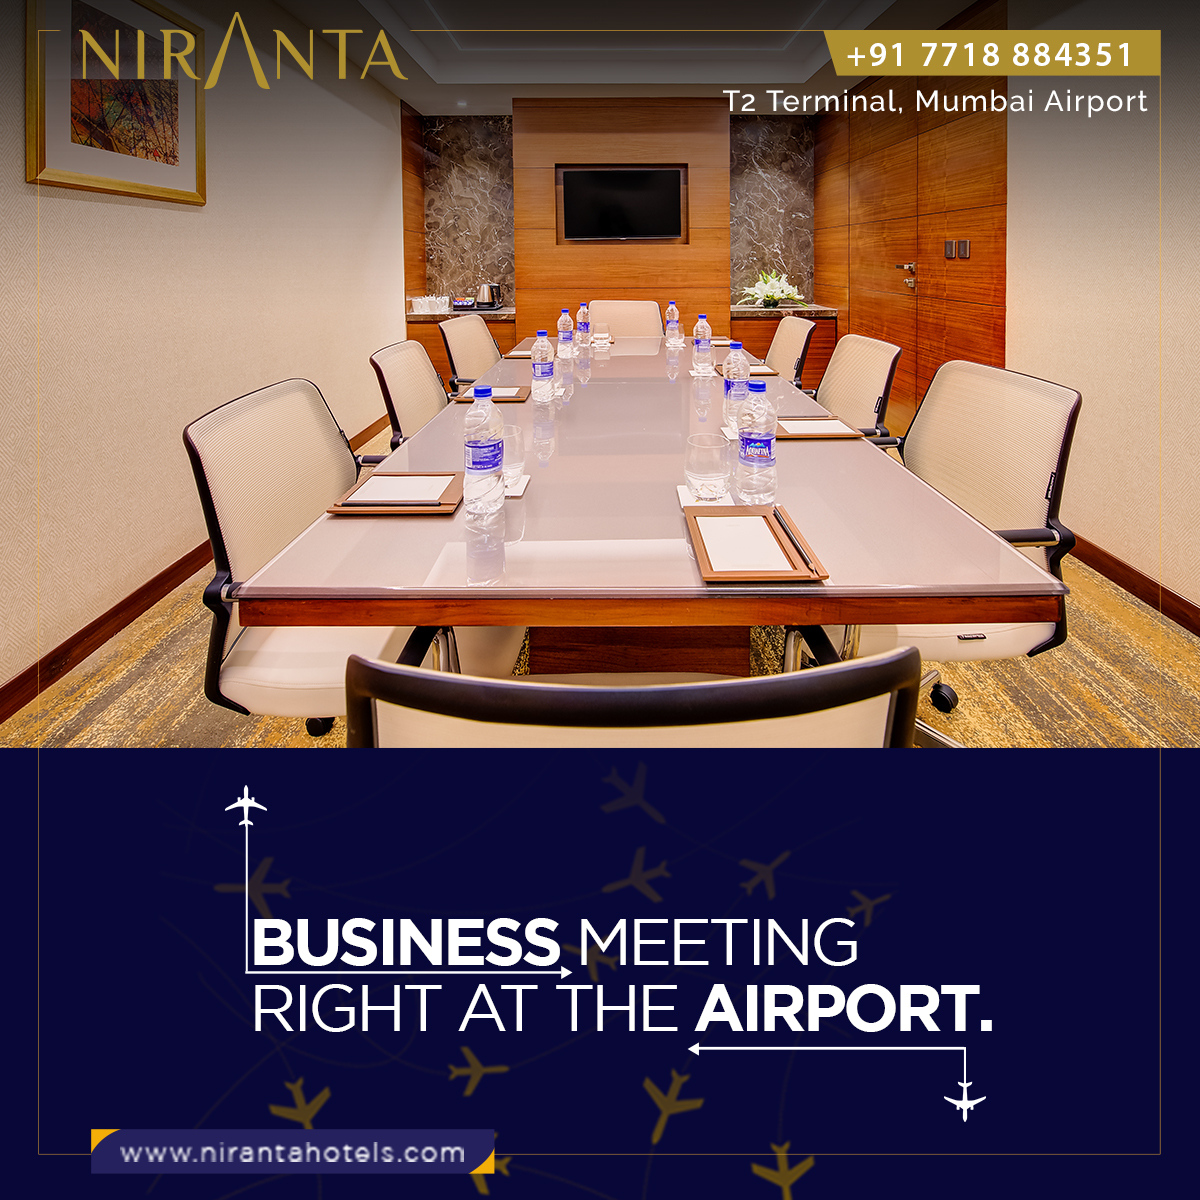 Plan your meeting within the airport at our spacious and comfy #business meeting rooms.
Book a room now: nirantahotels.com

#NirantaHotels #niranta #businessstay #businessmeeting #meetingathotel #meetingatairport #transit #hotels #mumbaiairport #traffic #mumbaihotel